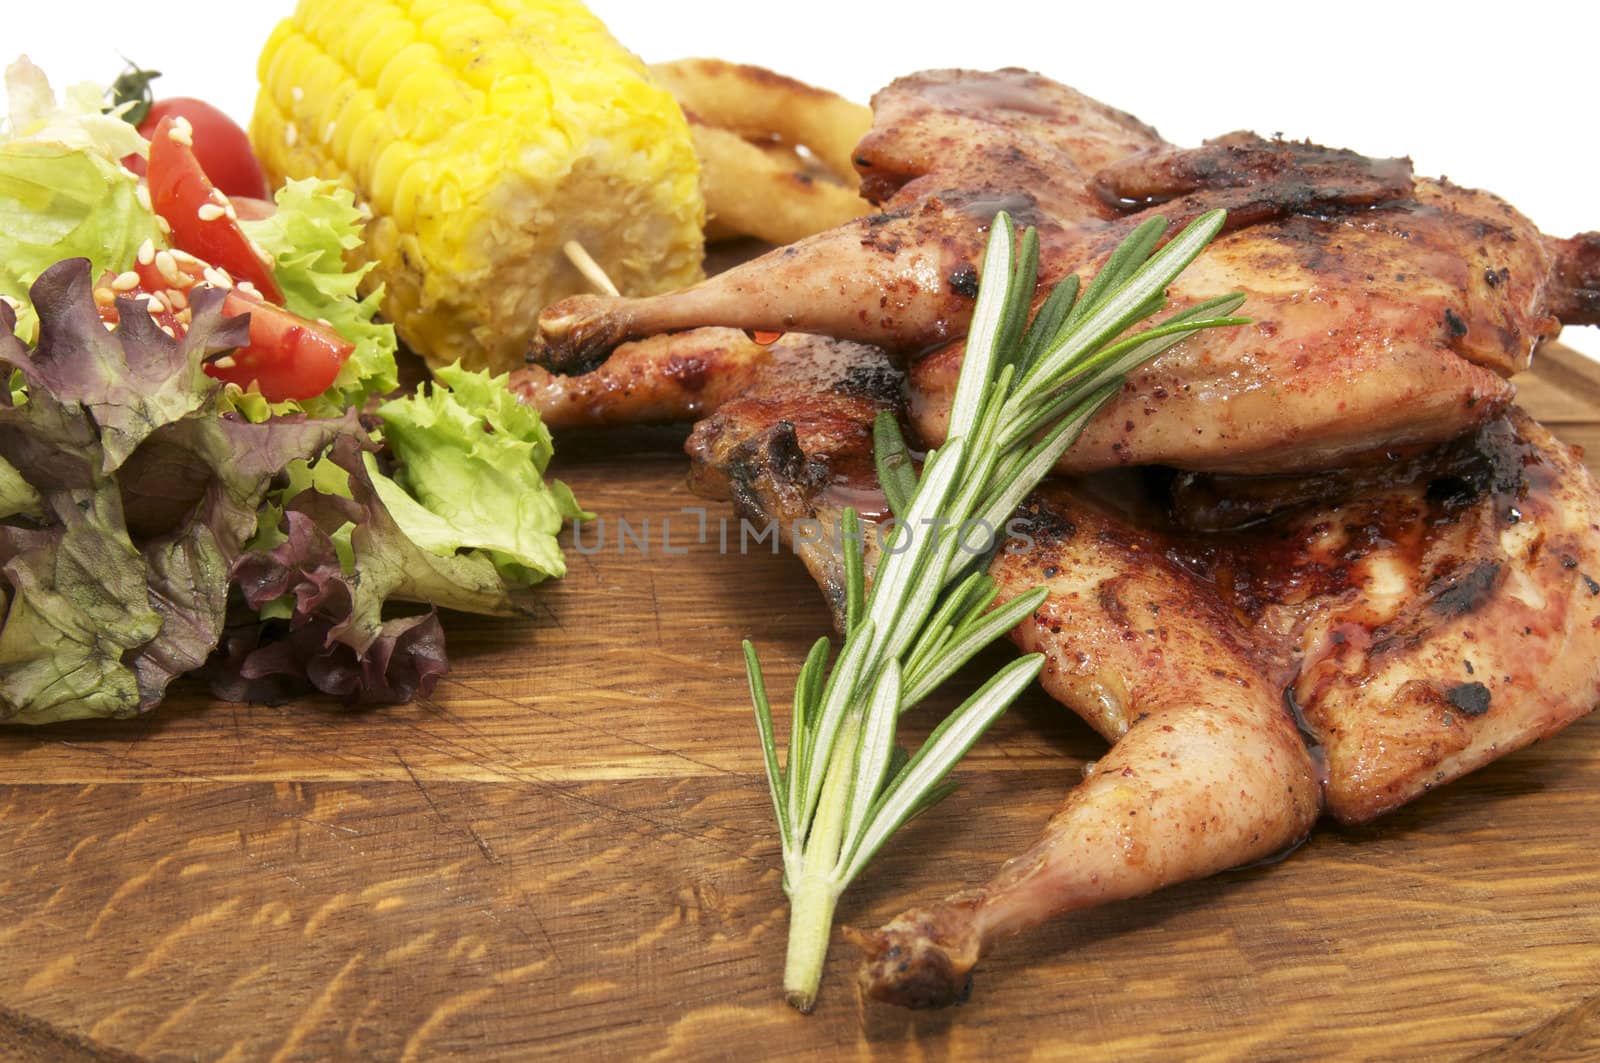 Grilled quail and vegetables by Lester120